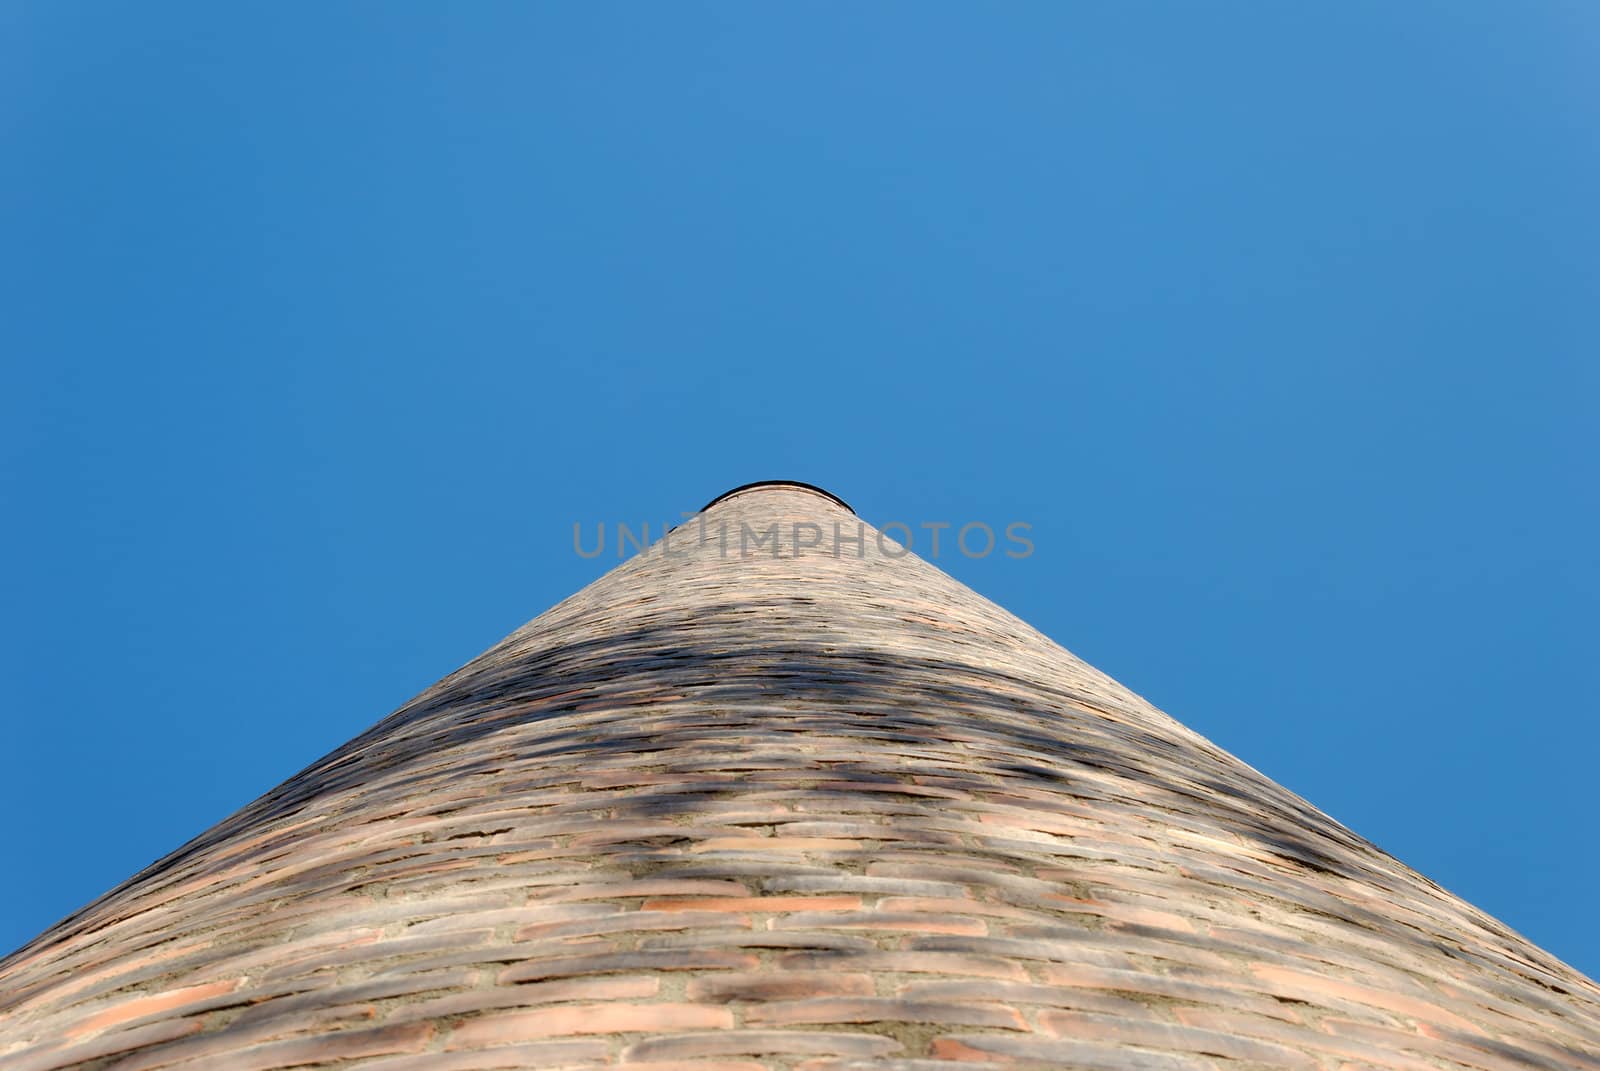 Brick factory chimney seen in perspective straight from below.
